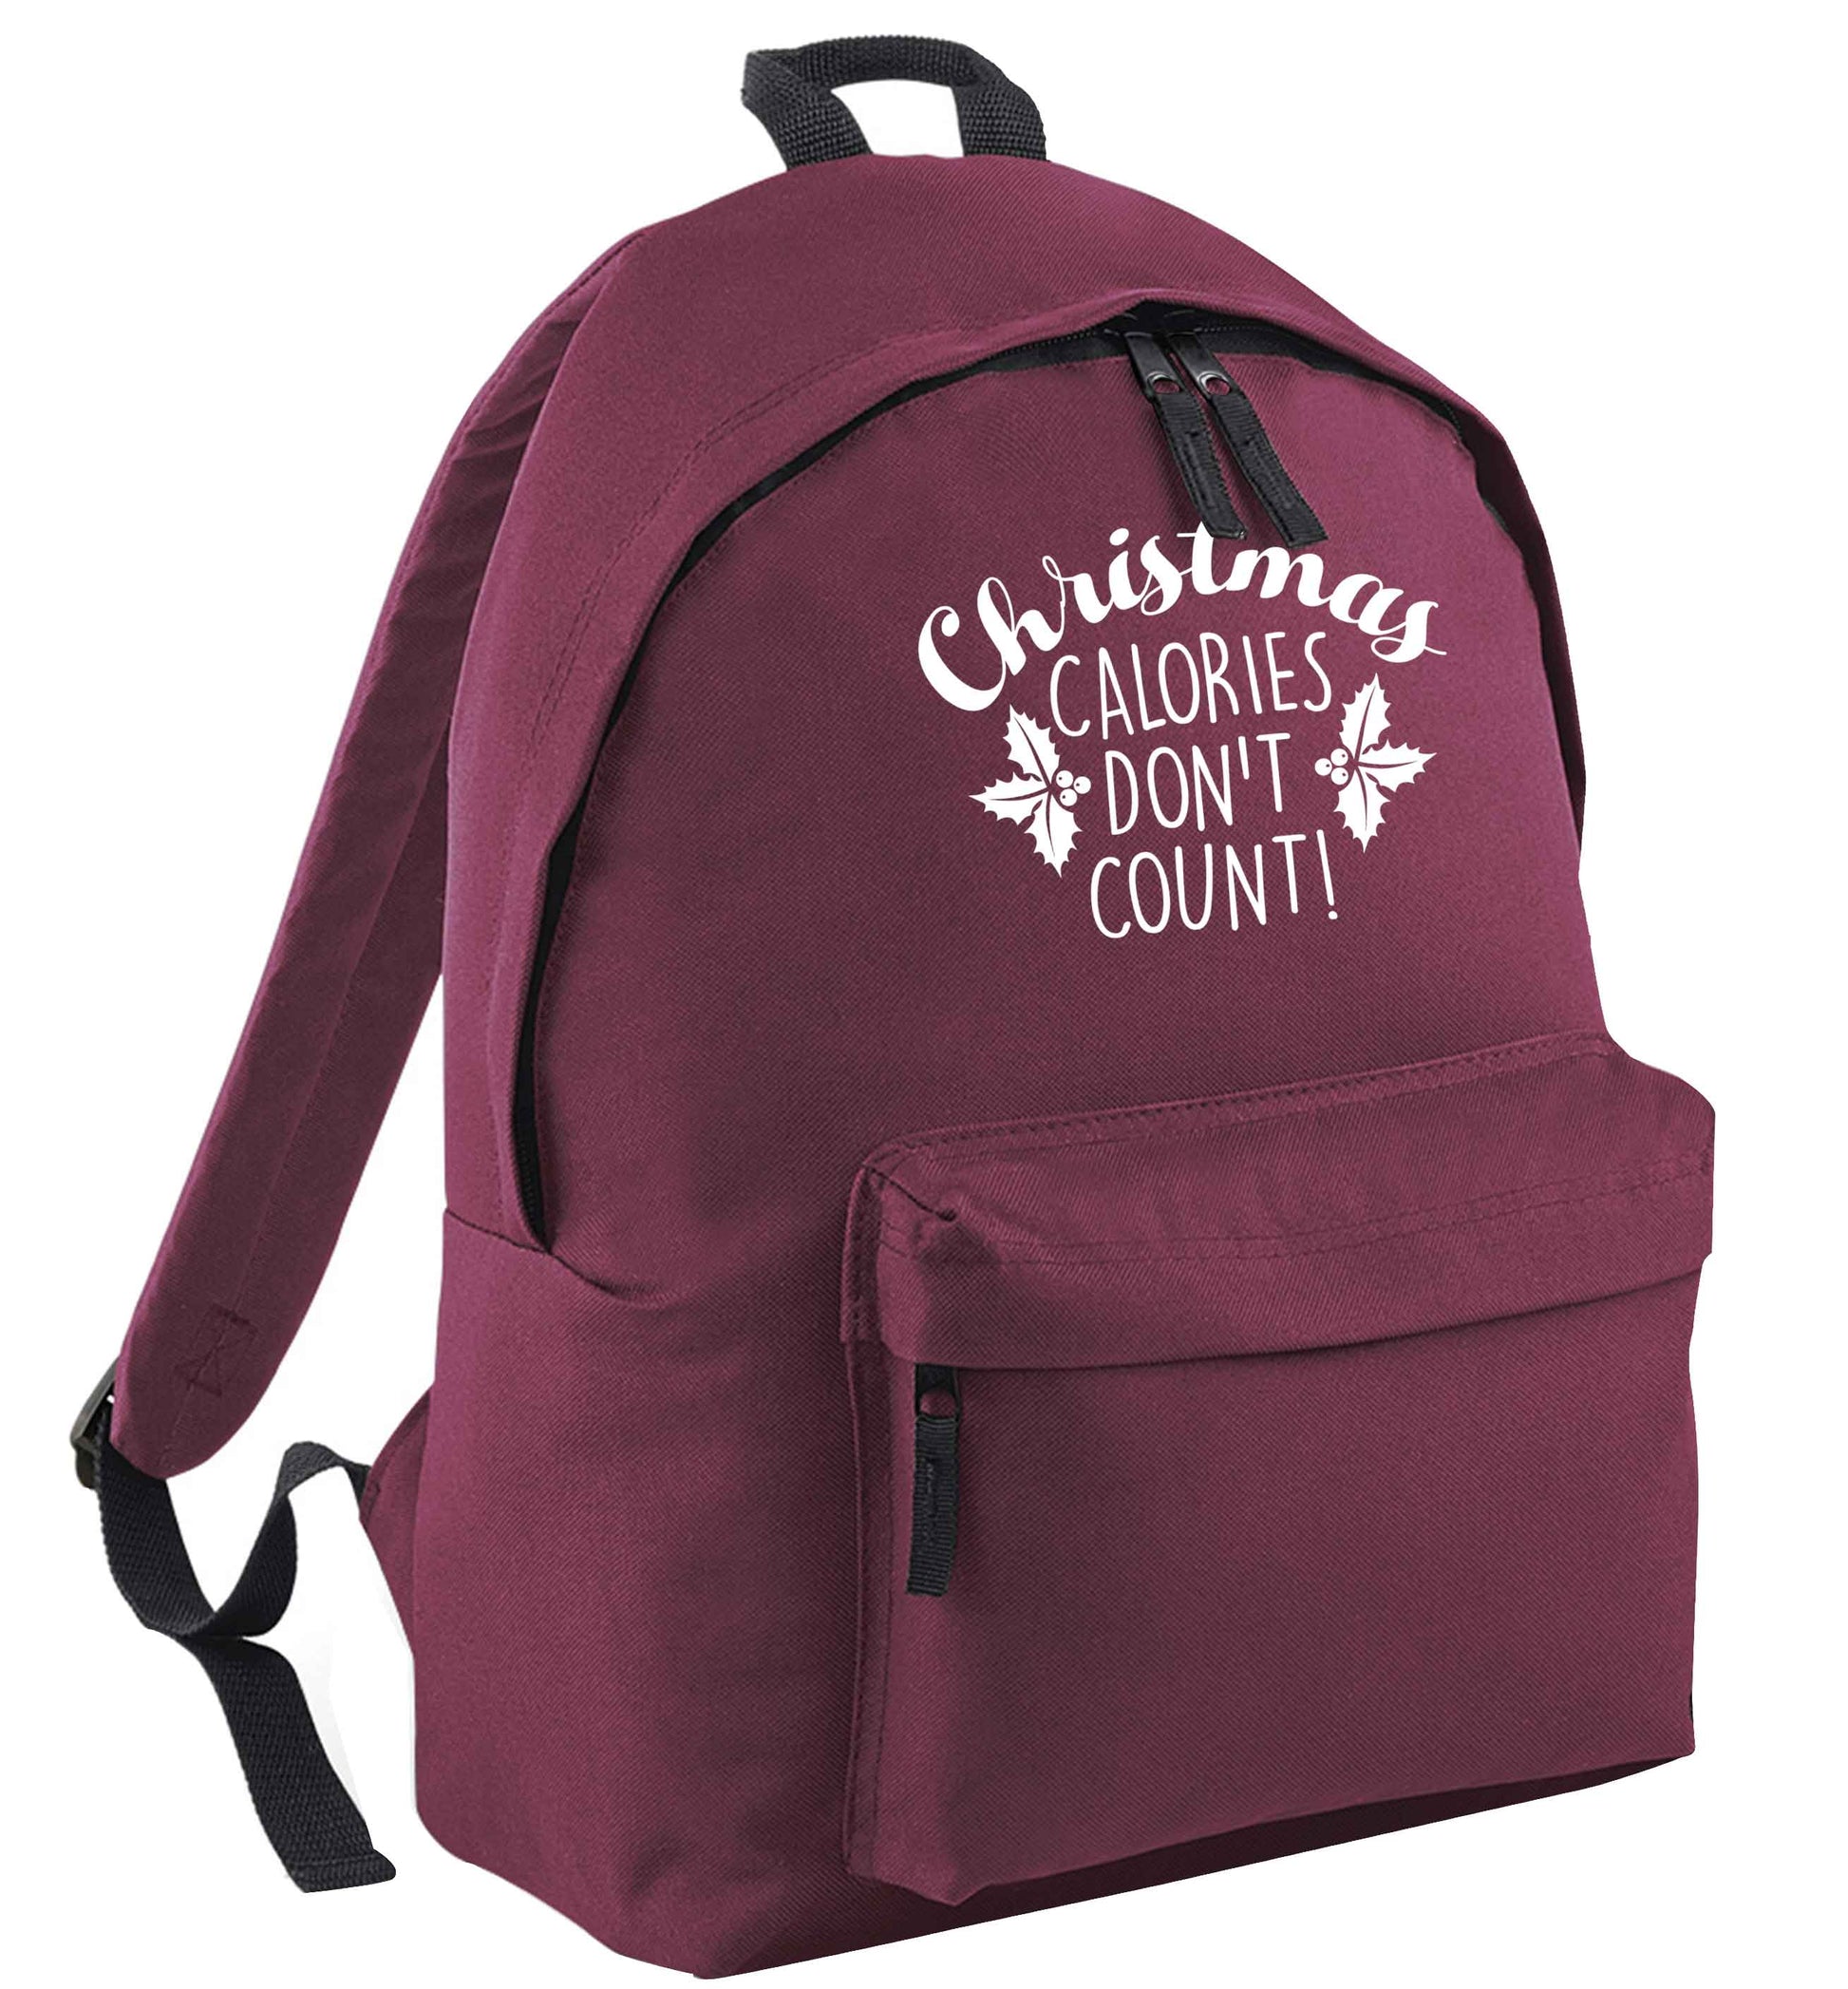 Christmas calories don't count maroon adults backpack